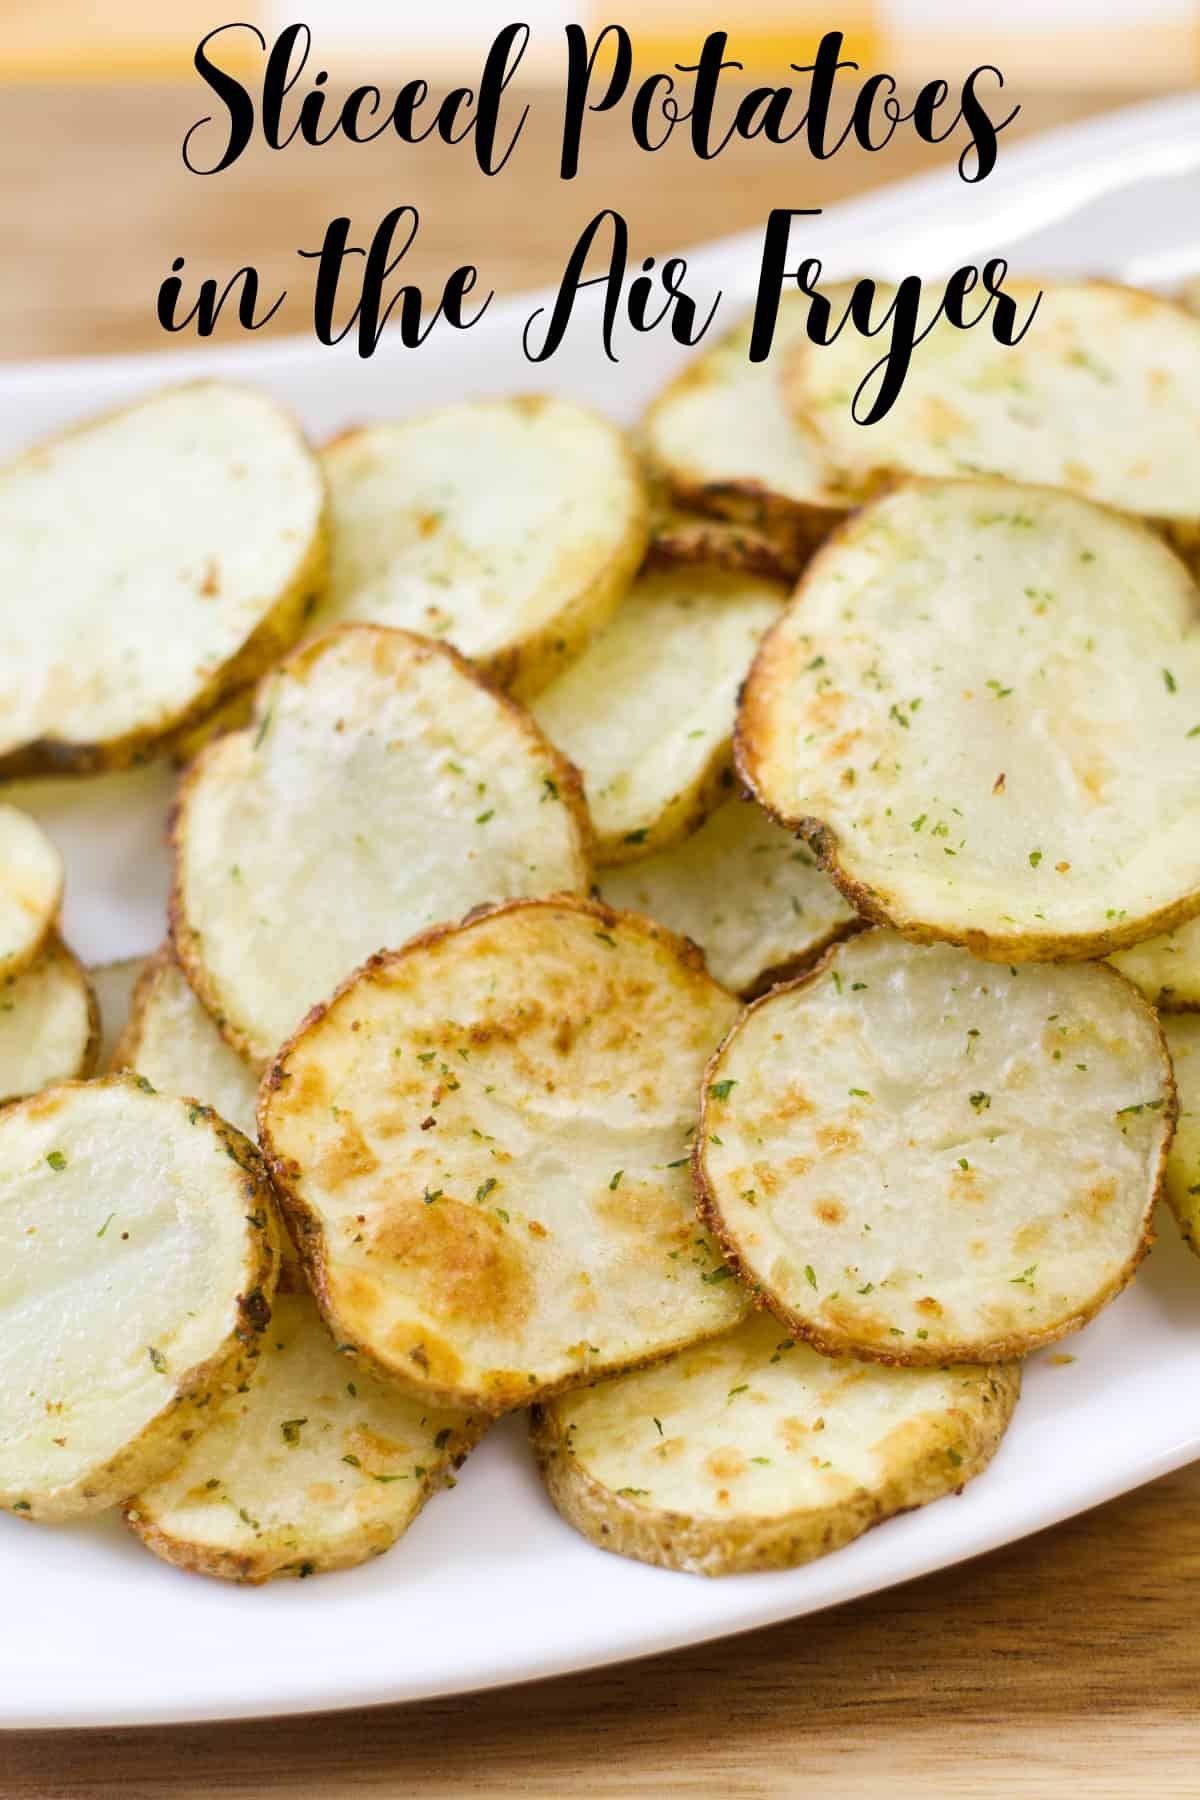 https://www.mindyscookingobsession.com/wp-content/uploads/2023/01/Sliced-Potatoes-in-the-Air-Fryer.jpg